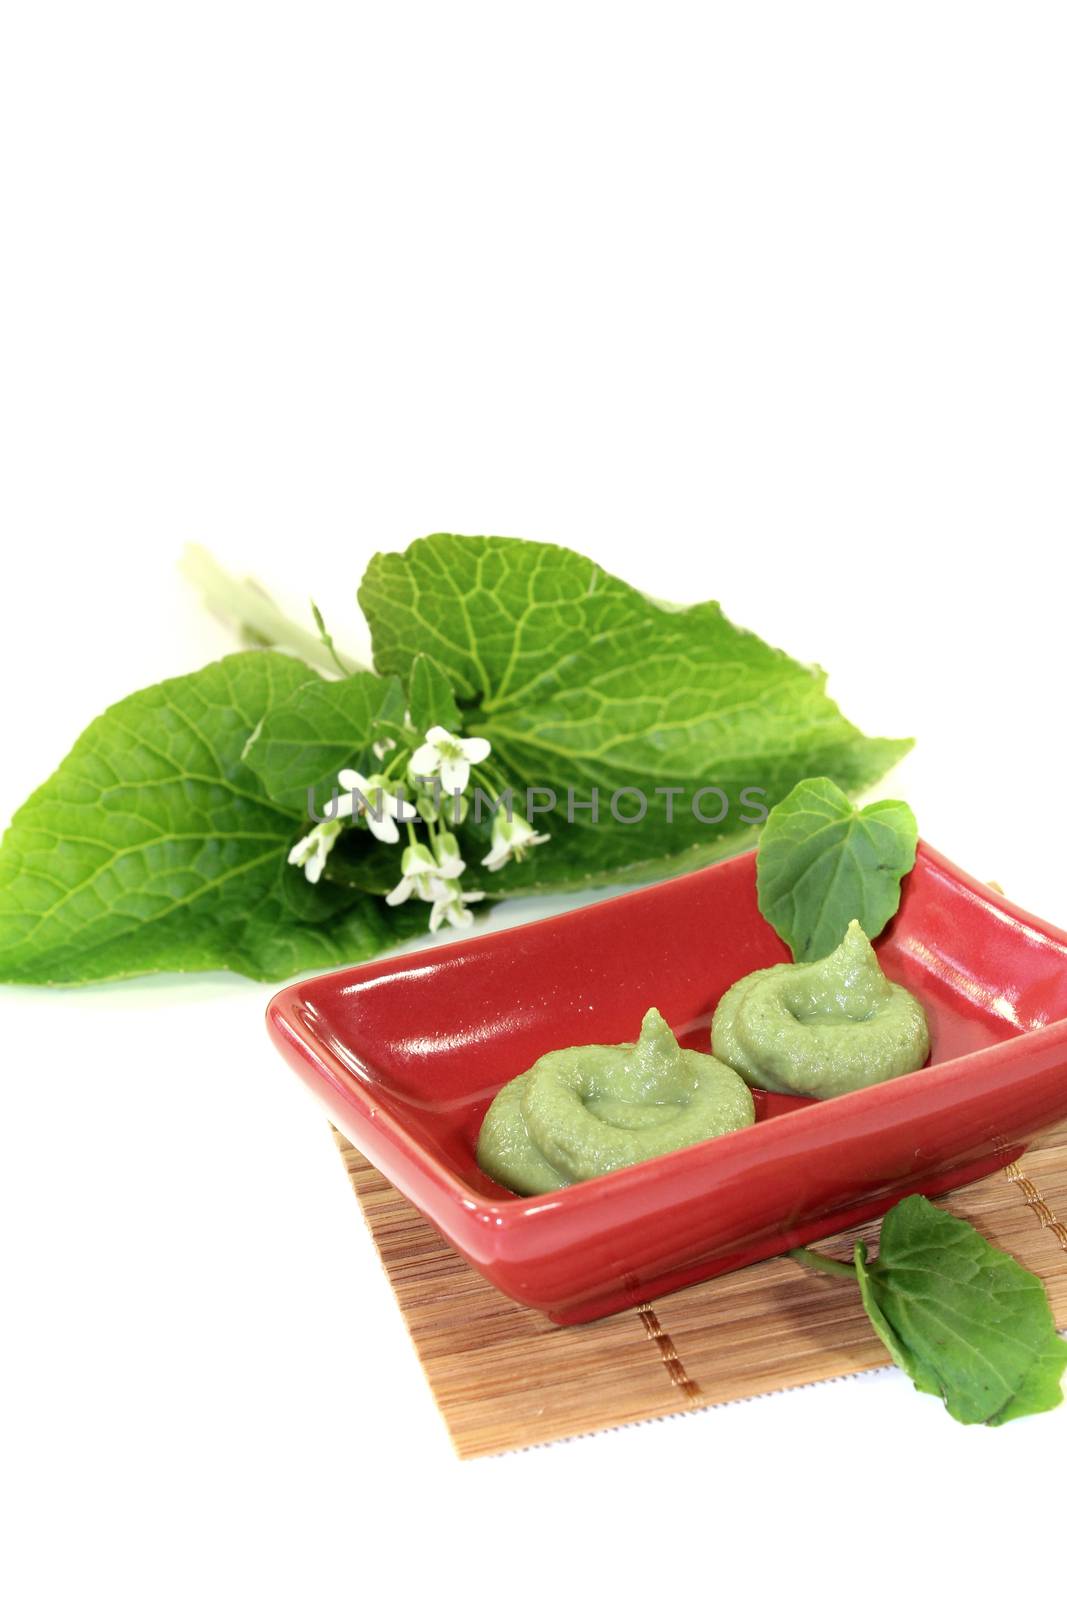 fresh spicy Wasabi with leaf and blossom by discovery